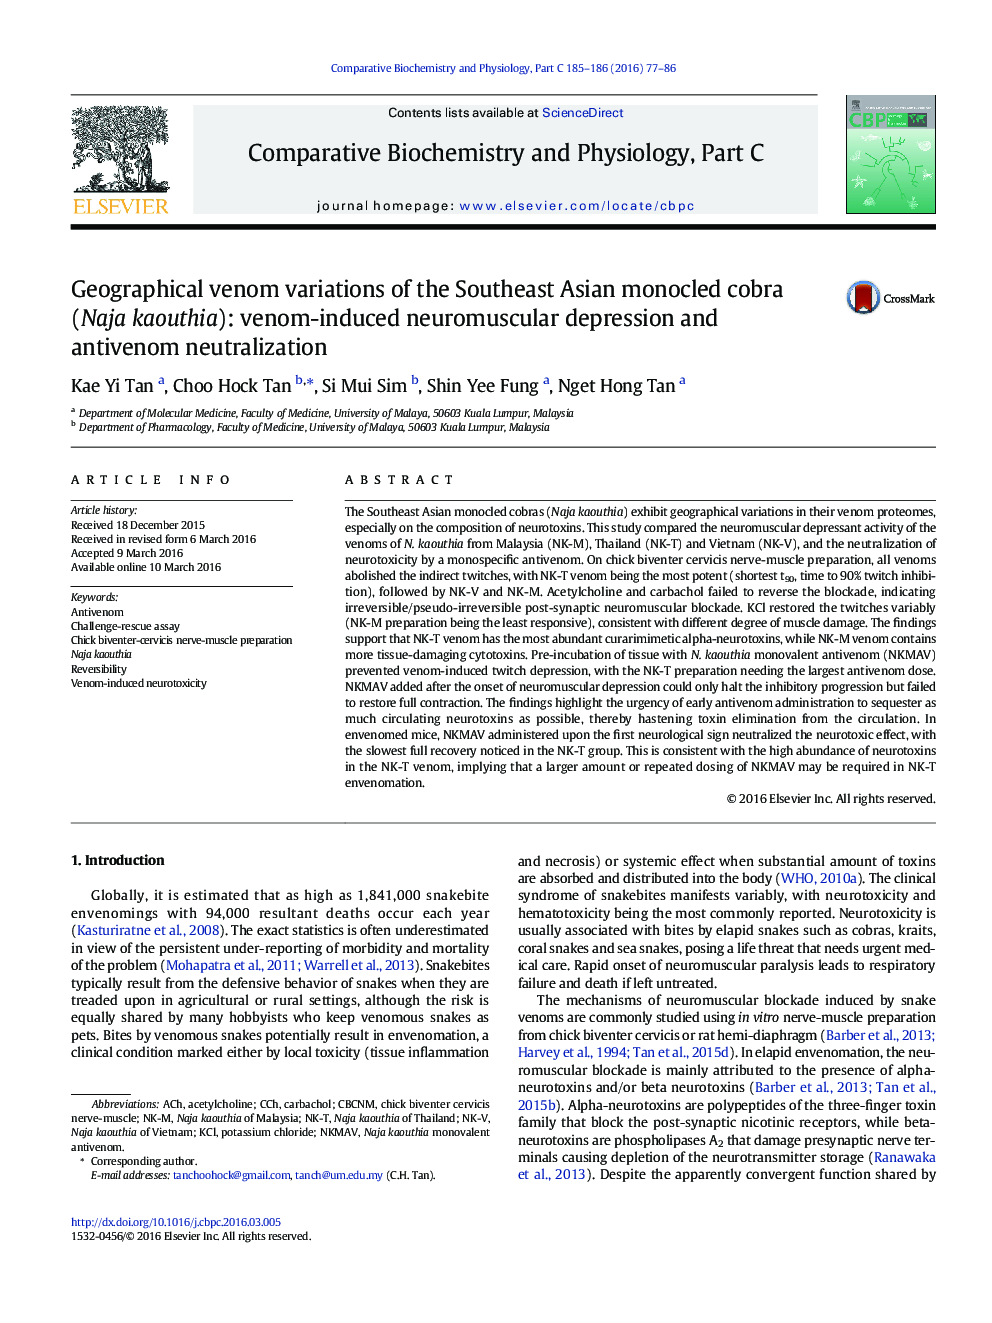 Geographical venom variations of the Southeast Asian monocled cobra (Naja kaouthia): venom-induced neuromuscular depression and antivenom neutralization